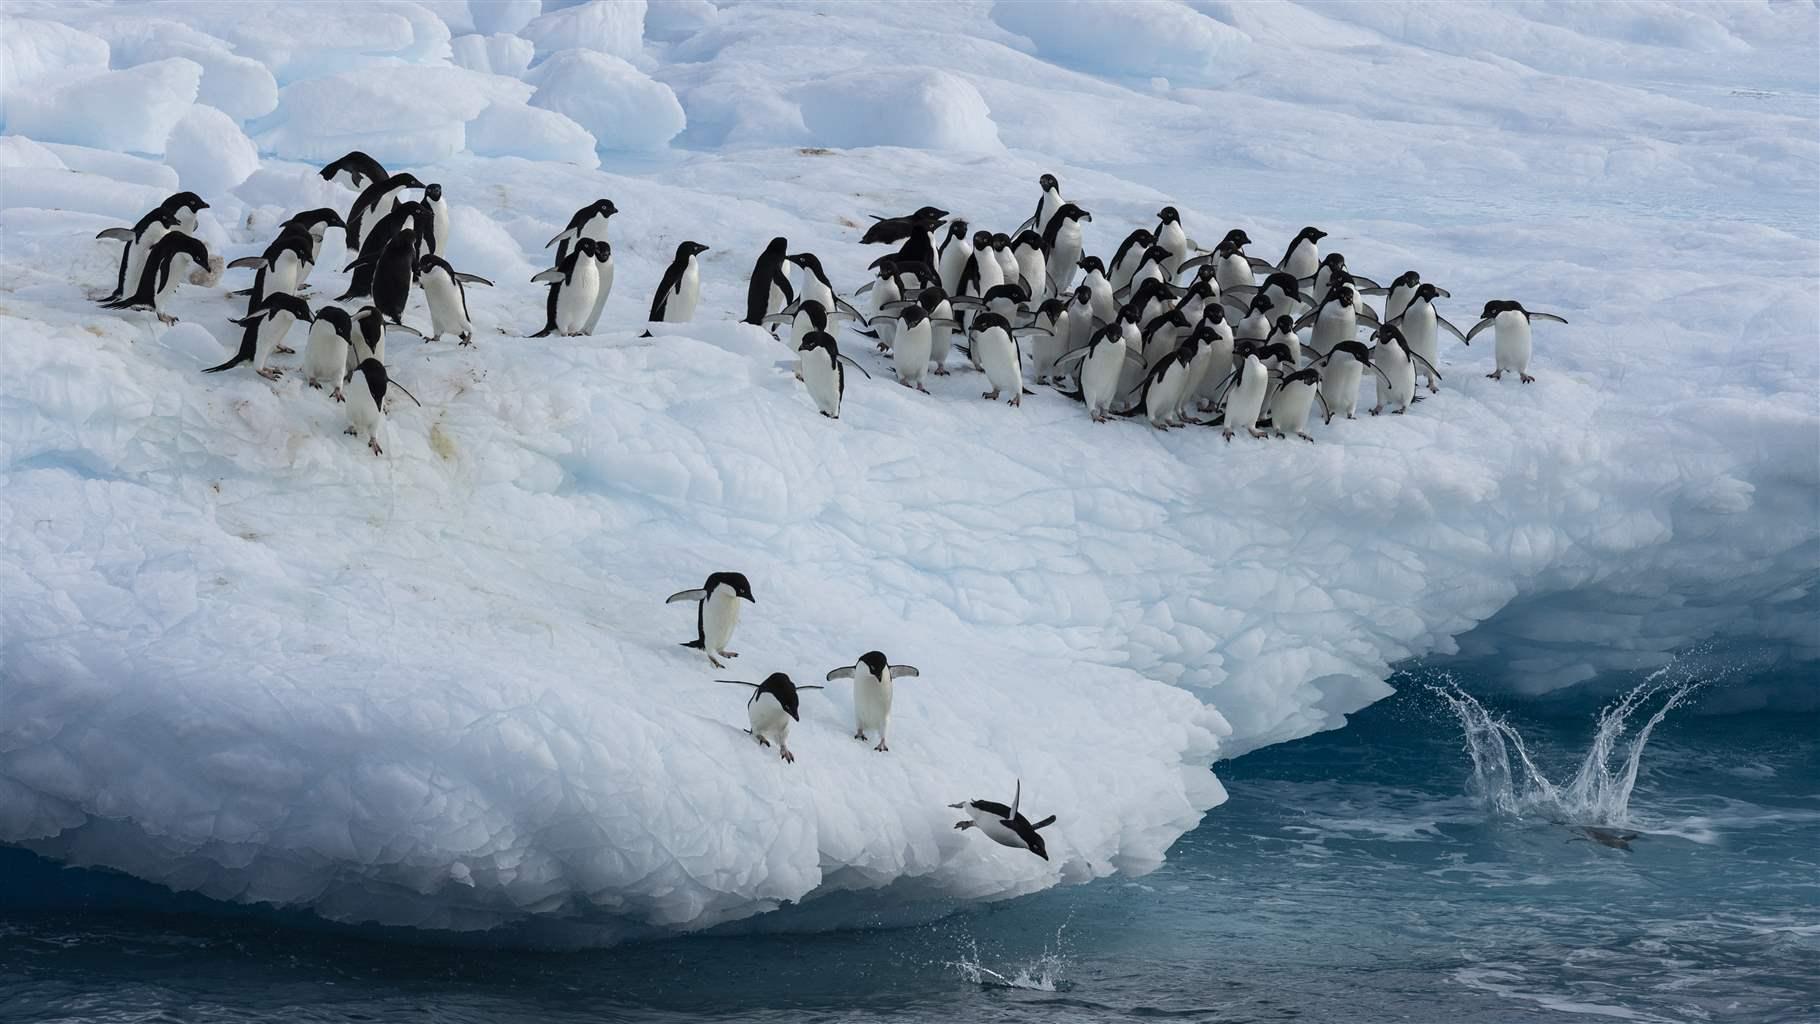 Tens of black-and-white penguins stand on the edge of an ice formation while several jump into the blue water below.